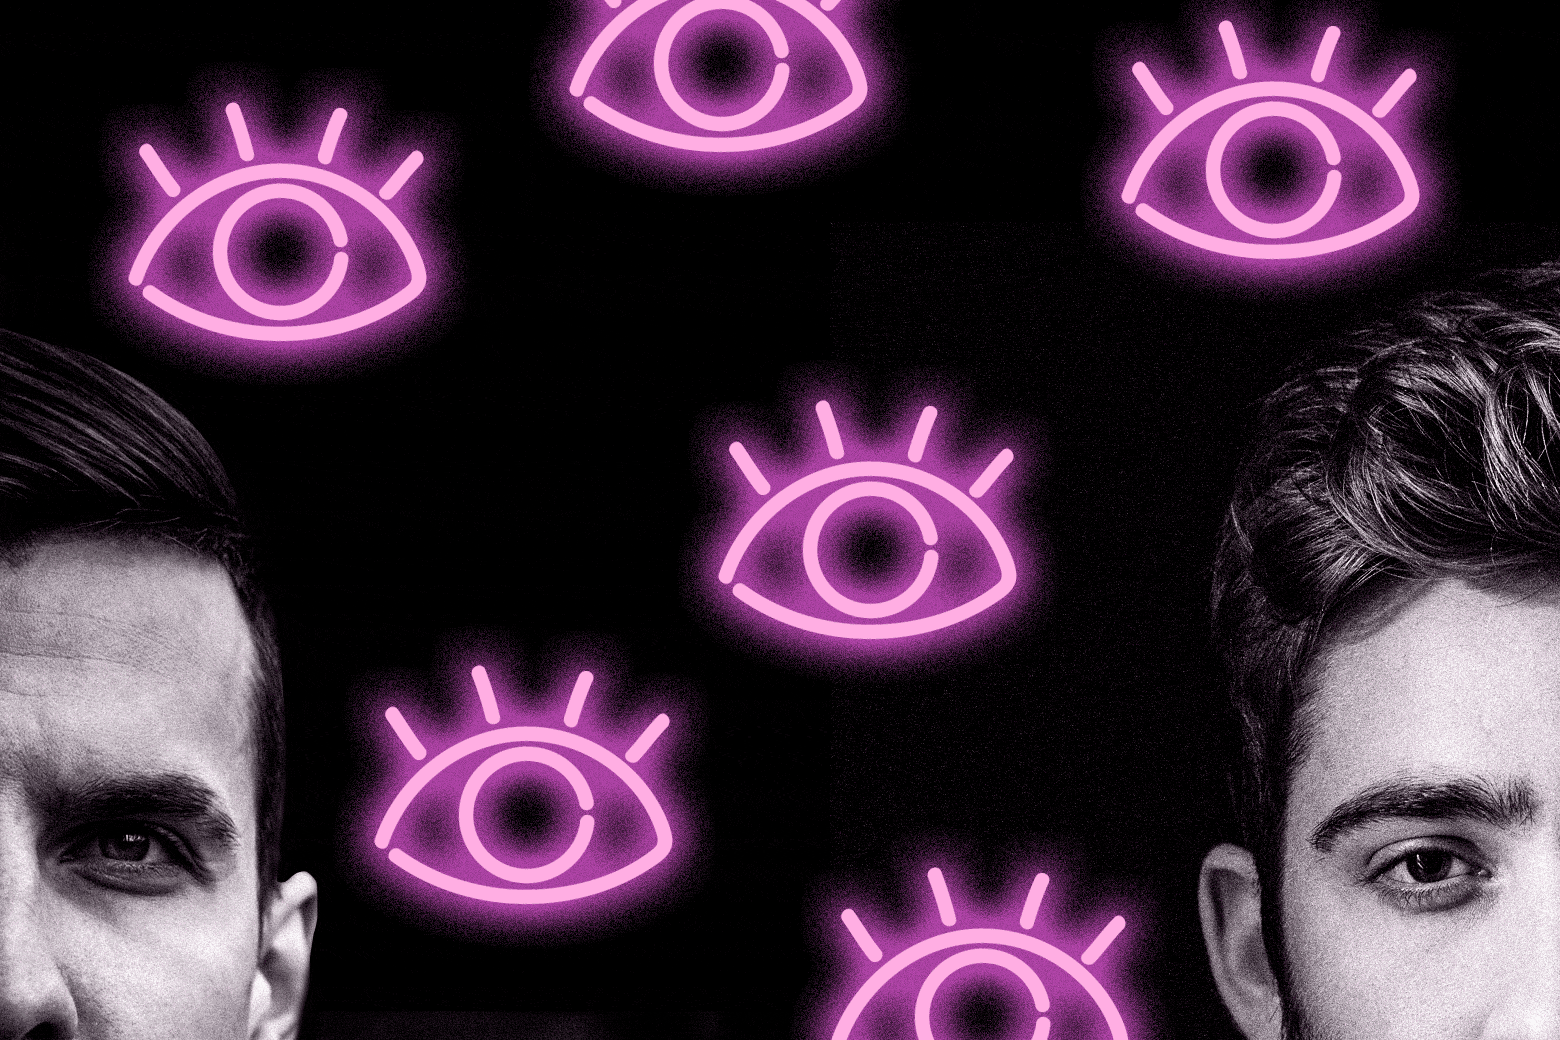 Partial view of the faces of two men with eyes behind them in neon lights.